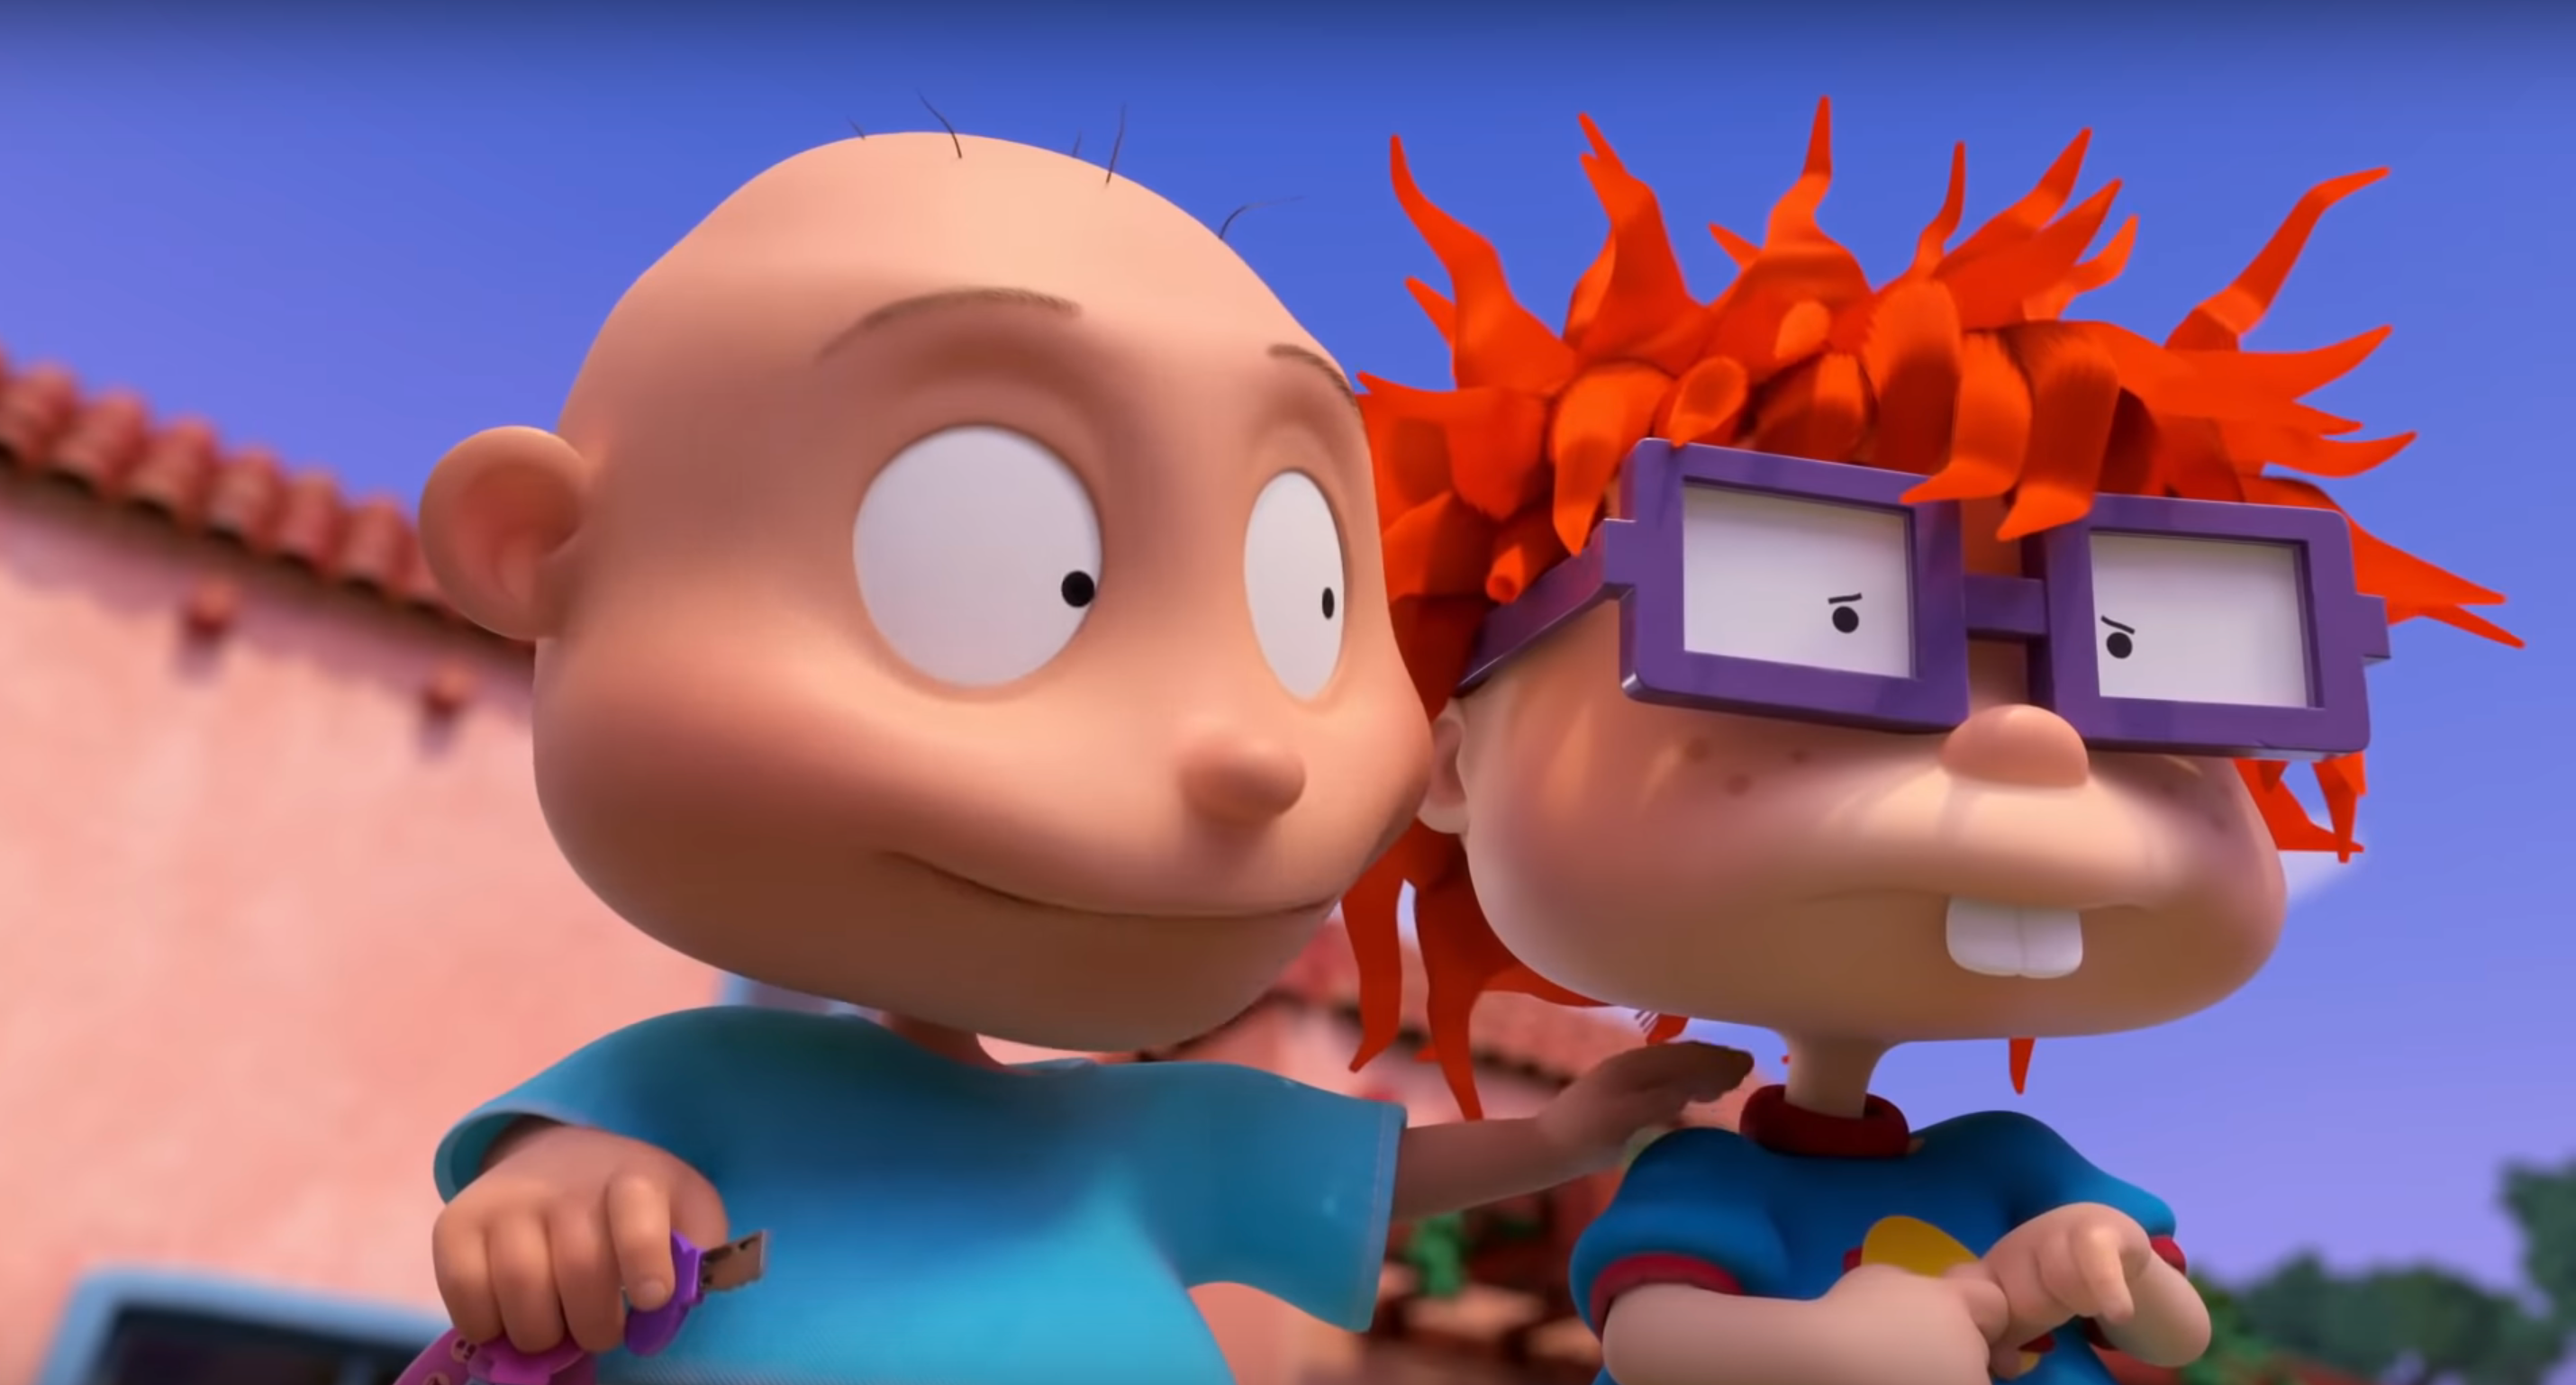 Watch the CGI 'Rugrats' Trailer for Paramount+